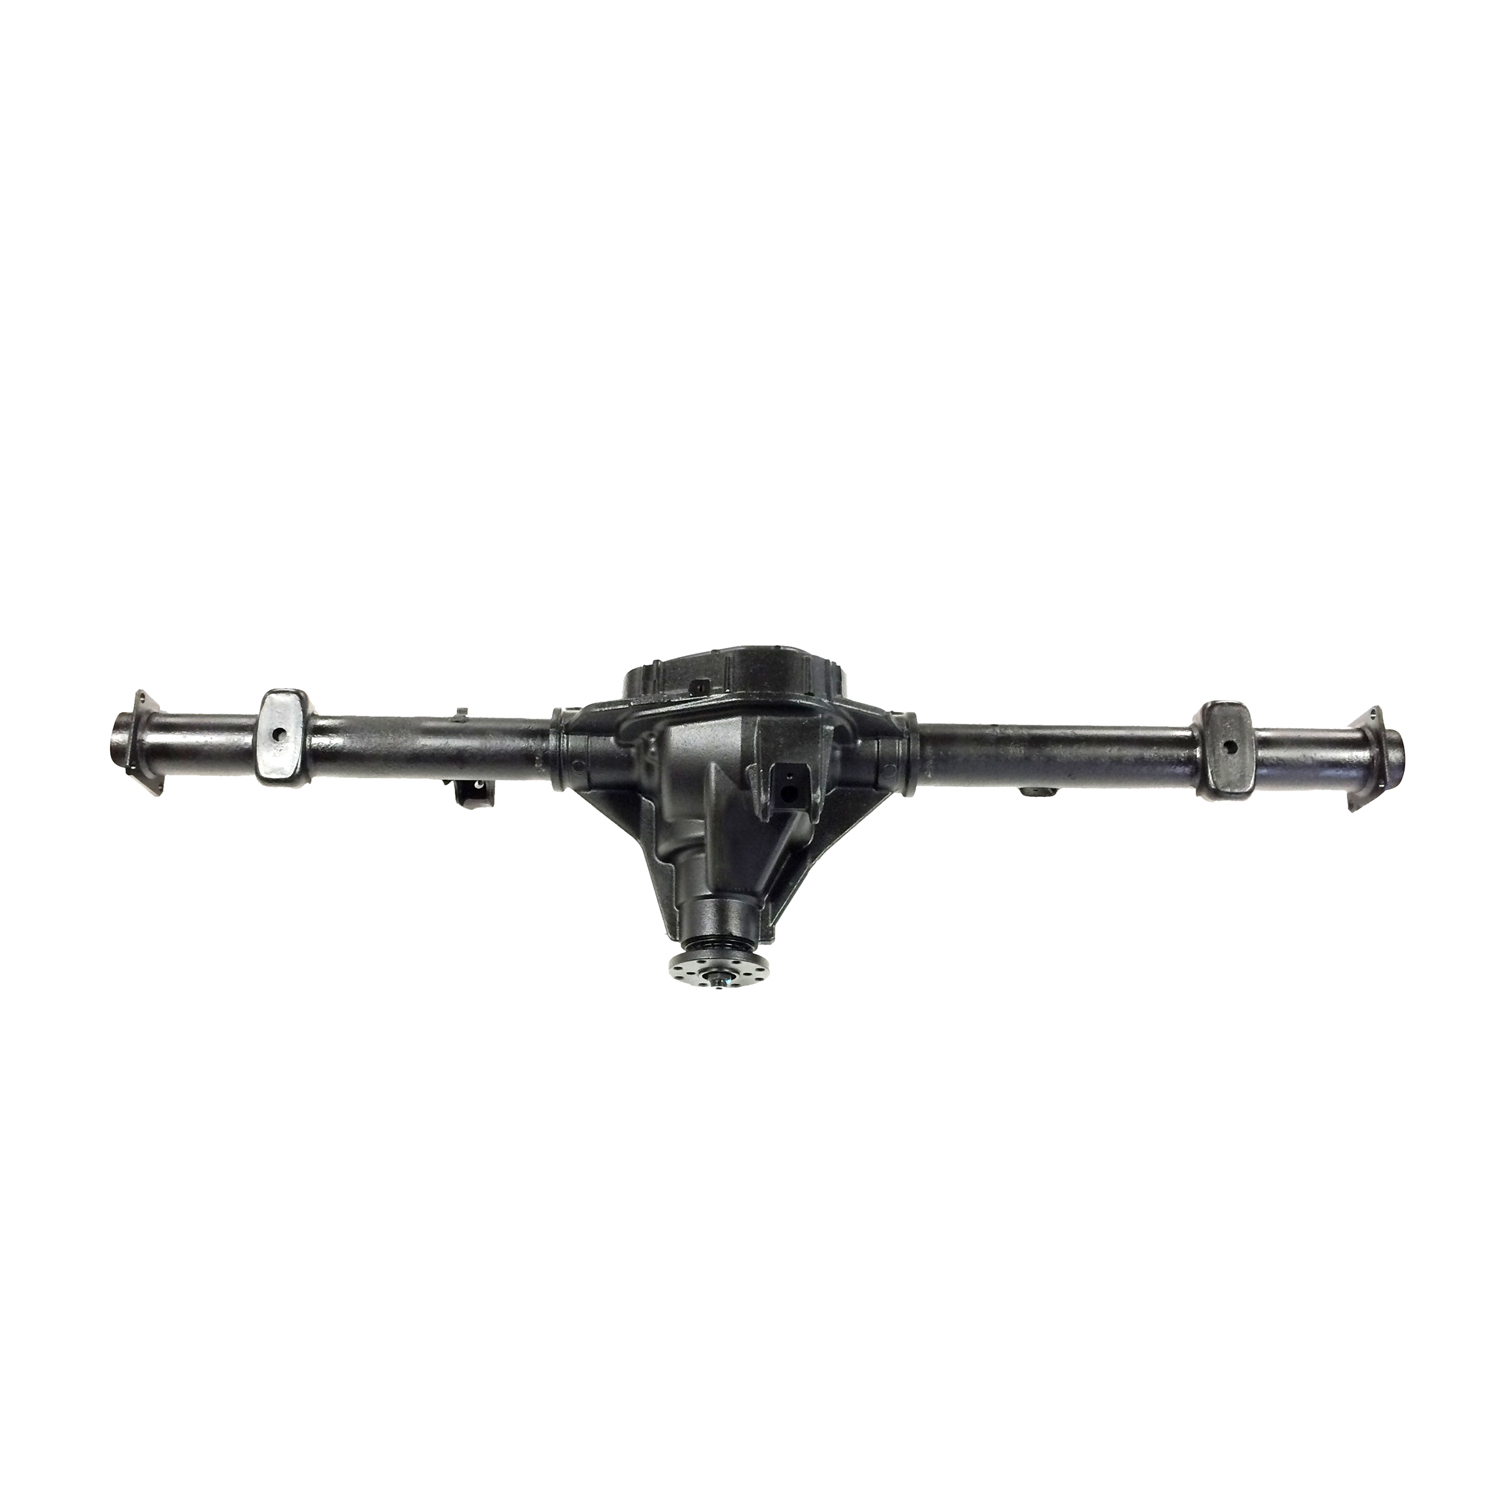 Remanufactured Complete Axle Assembly for 9.75" 04-05 F150 3.73 , Disc Brakes, Posi LSD